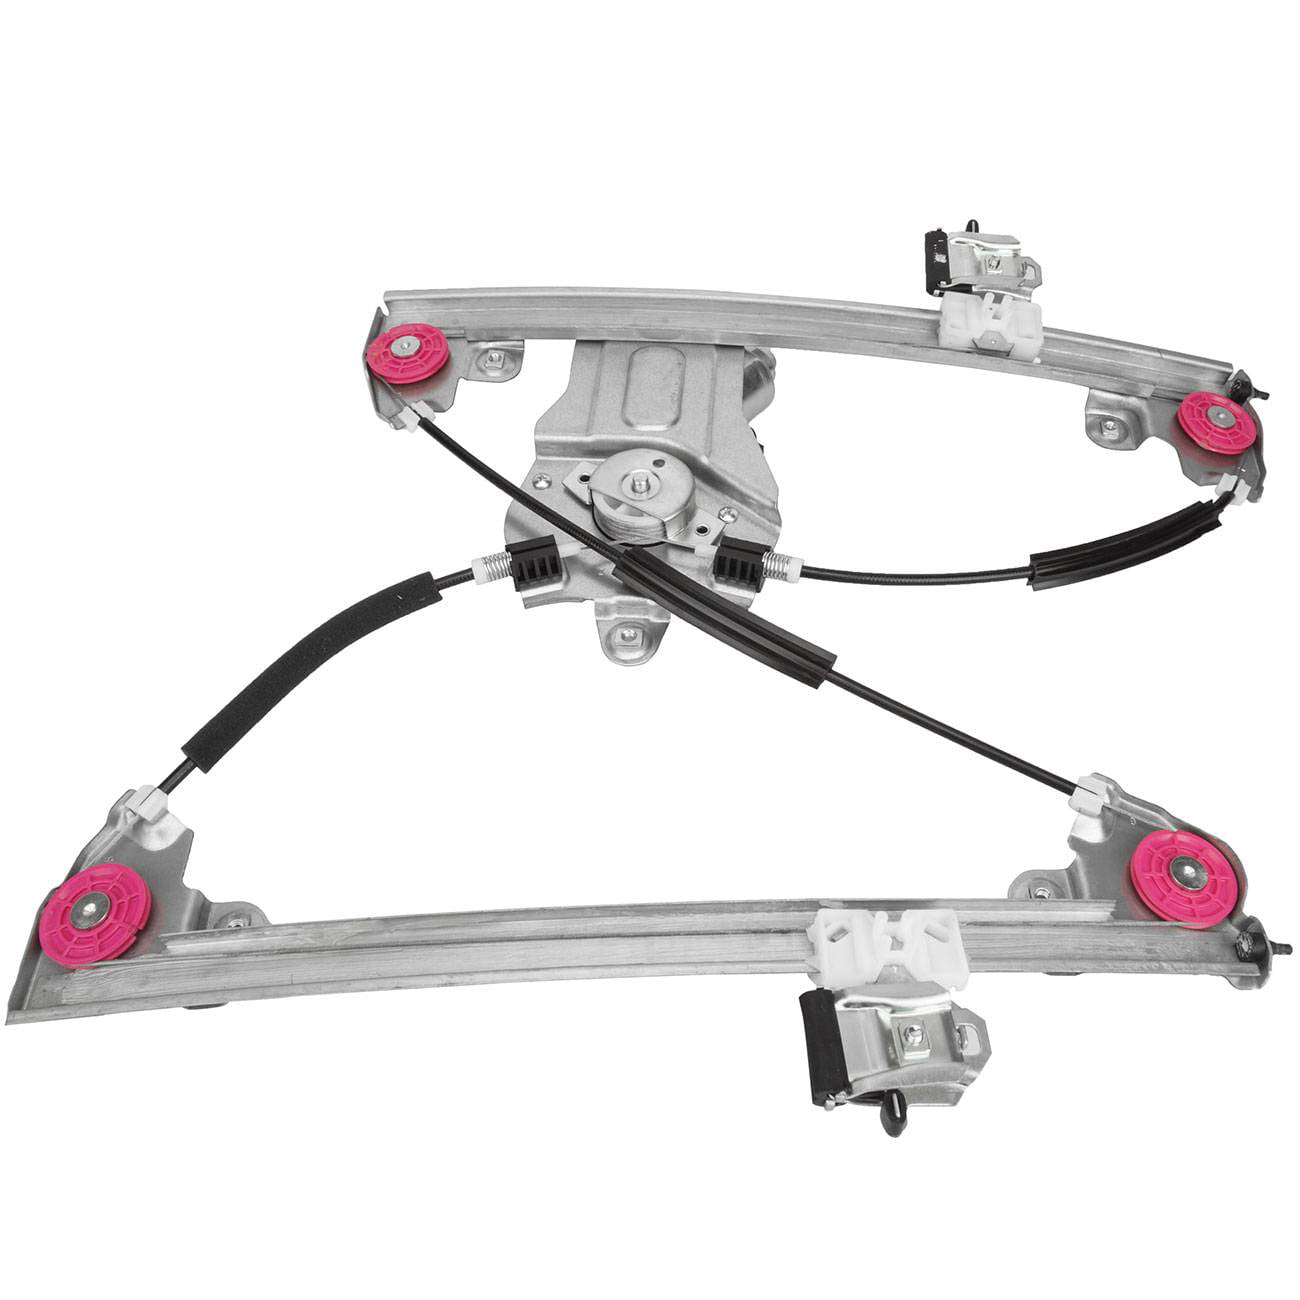 Drivers Front Manual Window Lift Regulator Assembly Replacement for Pontiac Buick Oldsmobile 16633099 